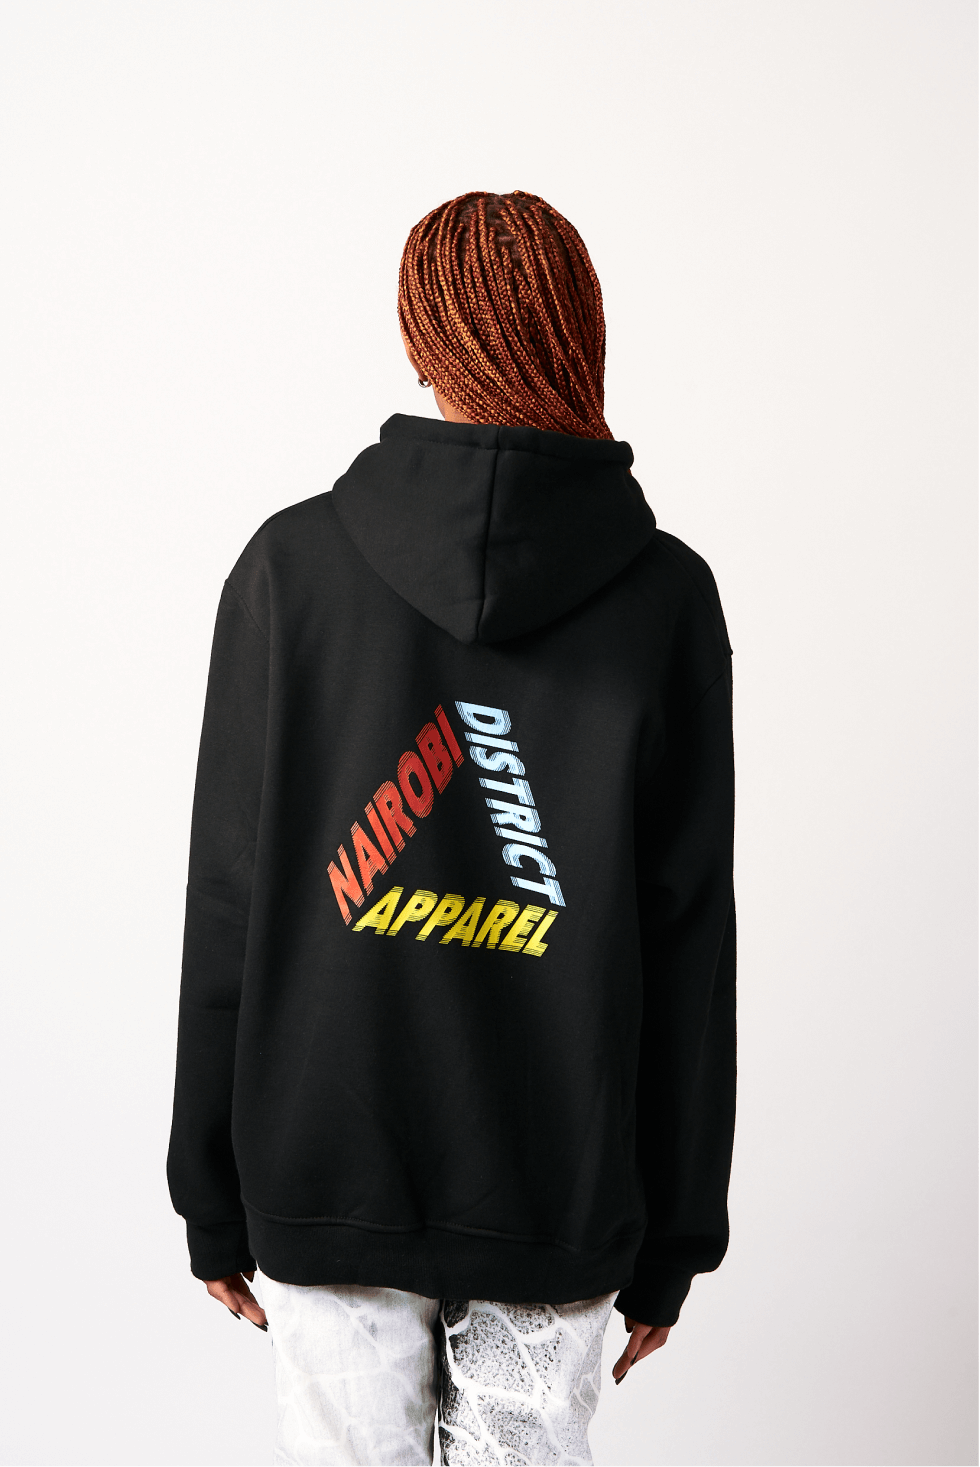 Shop Nairobi Apparel Printed Triangle Logo Hoodie by Nairobi Apparel District on Arrai. Discover stylish, affordable clothing, jewelry, handbags and unique handmade pieces from top Kenyan & African fashion brands prioritising sustainability and quality cr